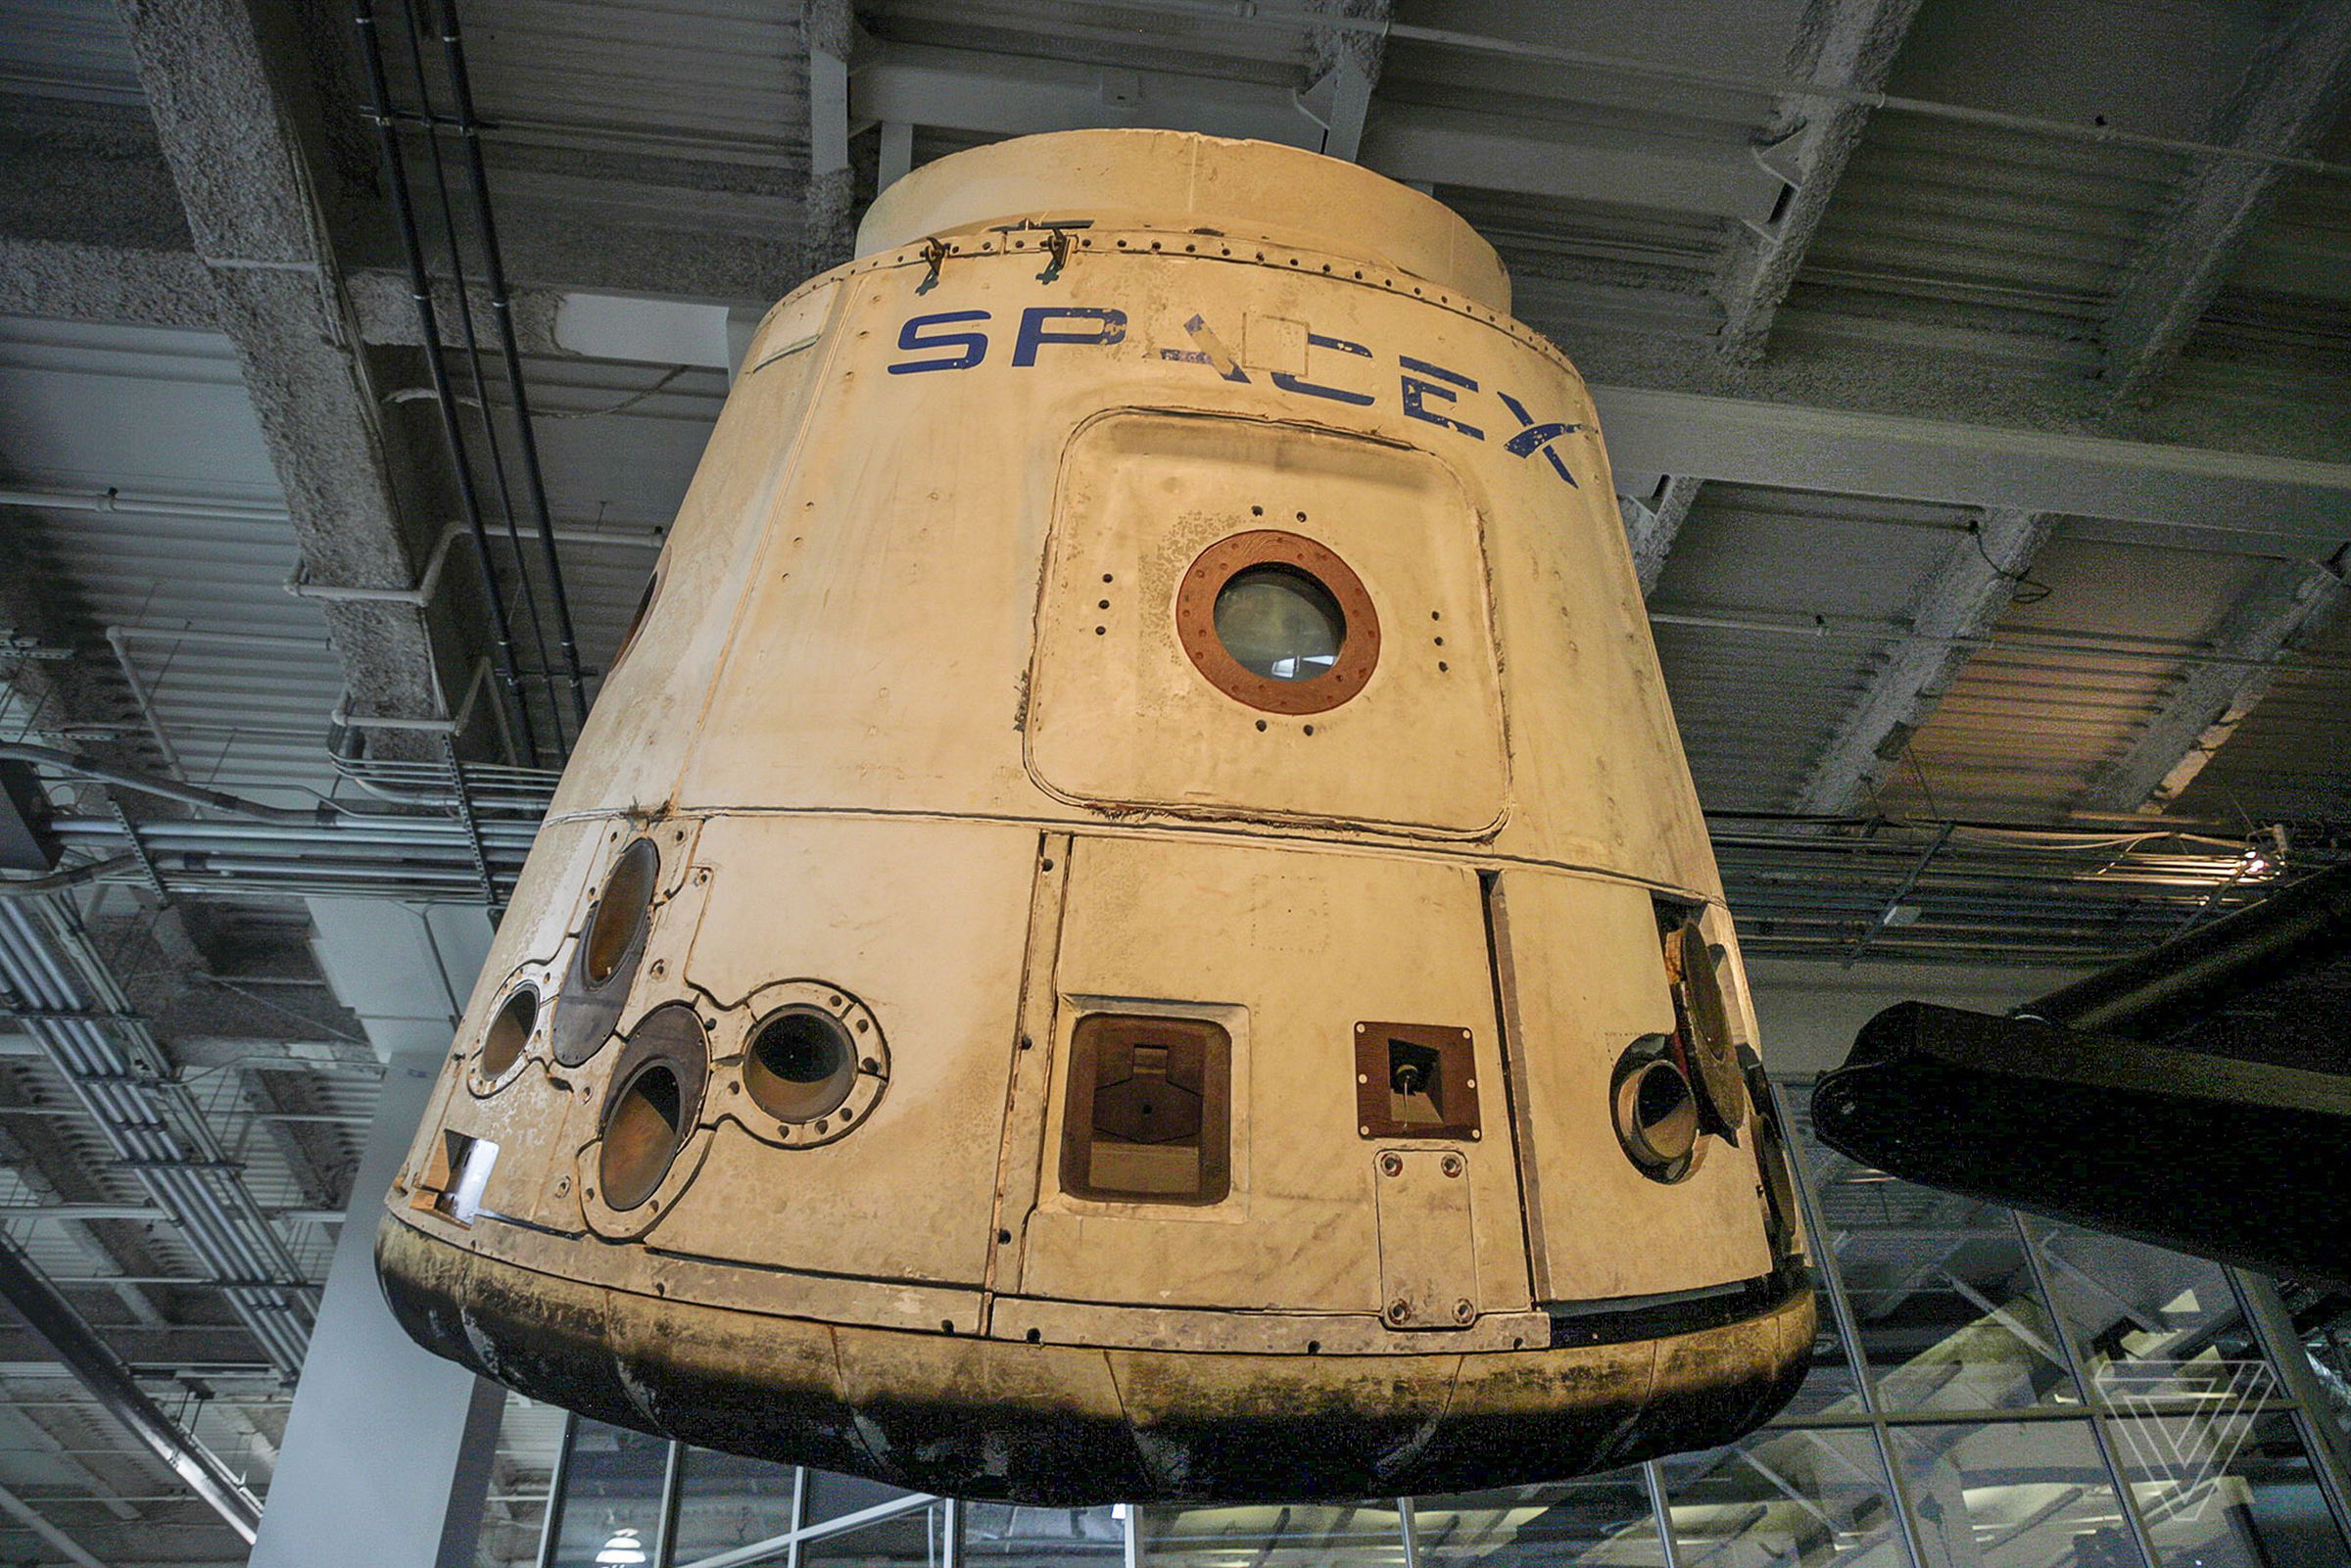 The first Dragon cargo capsule that ever flew to space hangs over SpaceX’s headquarters.